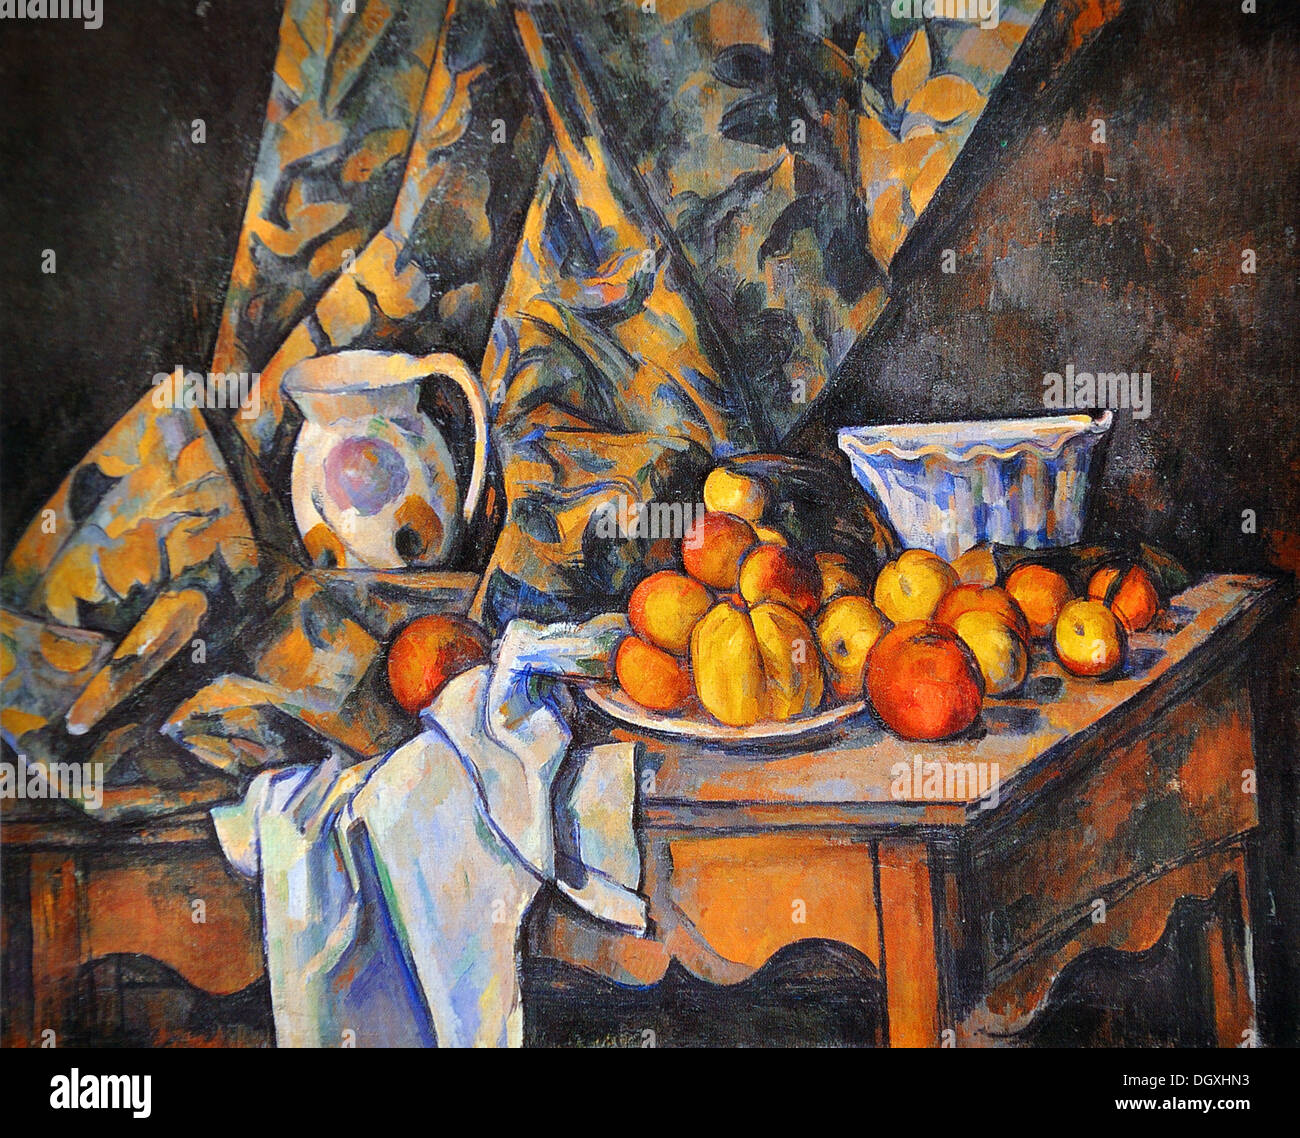 Still Life with Apples and Peaches - by Paul Cézanne, 1905 Stock Photo